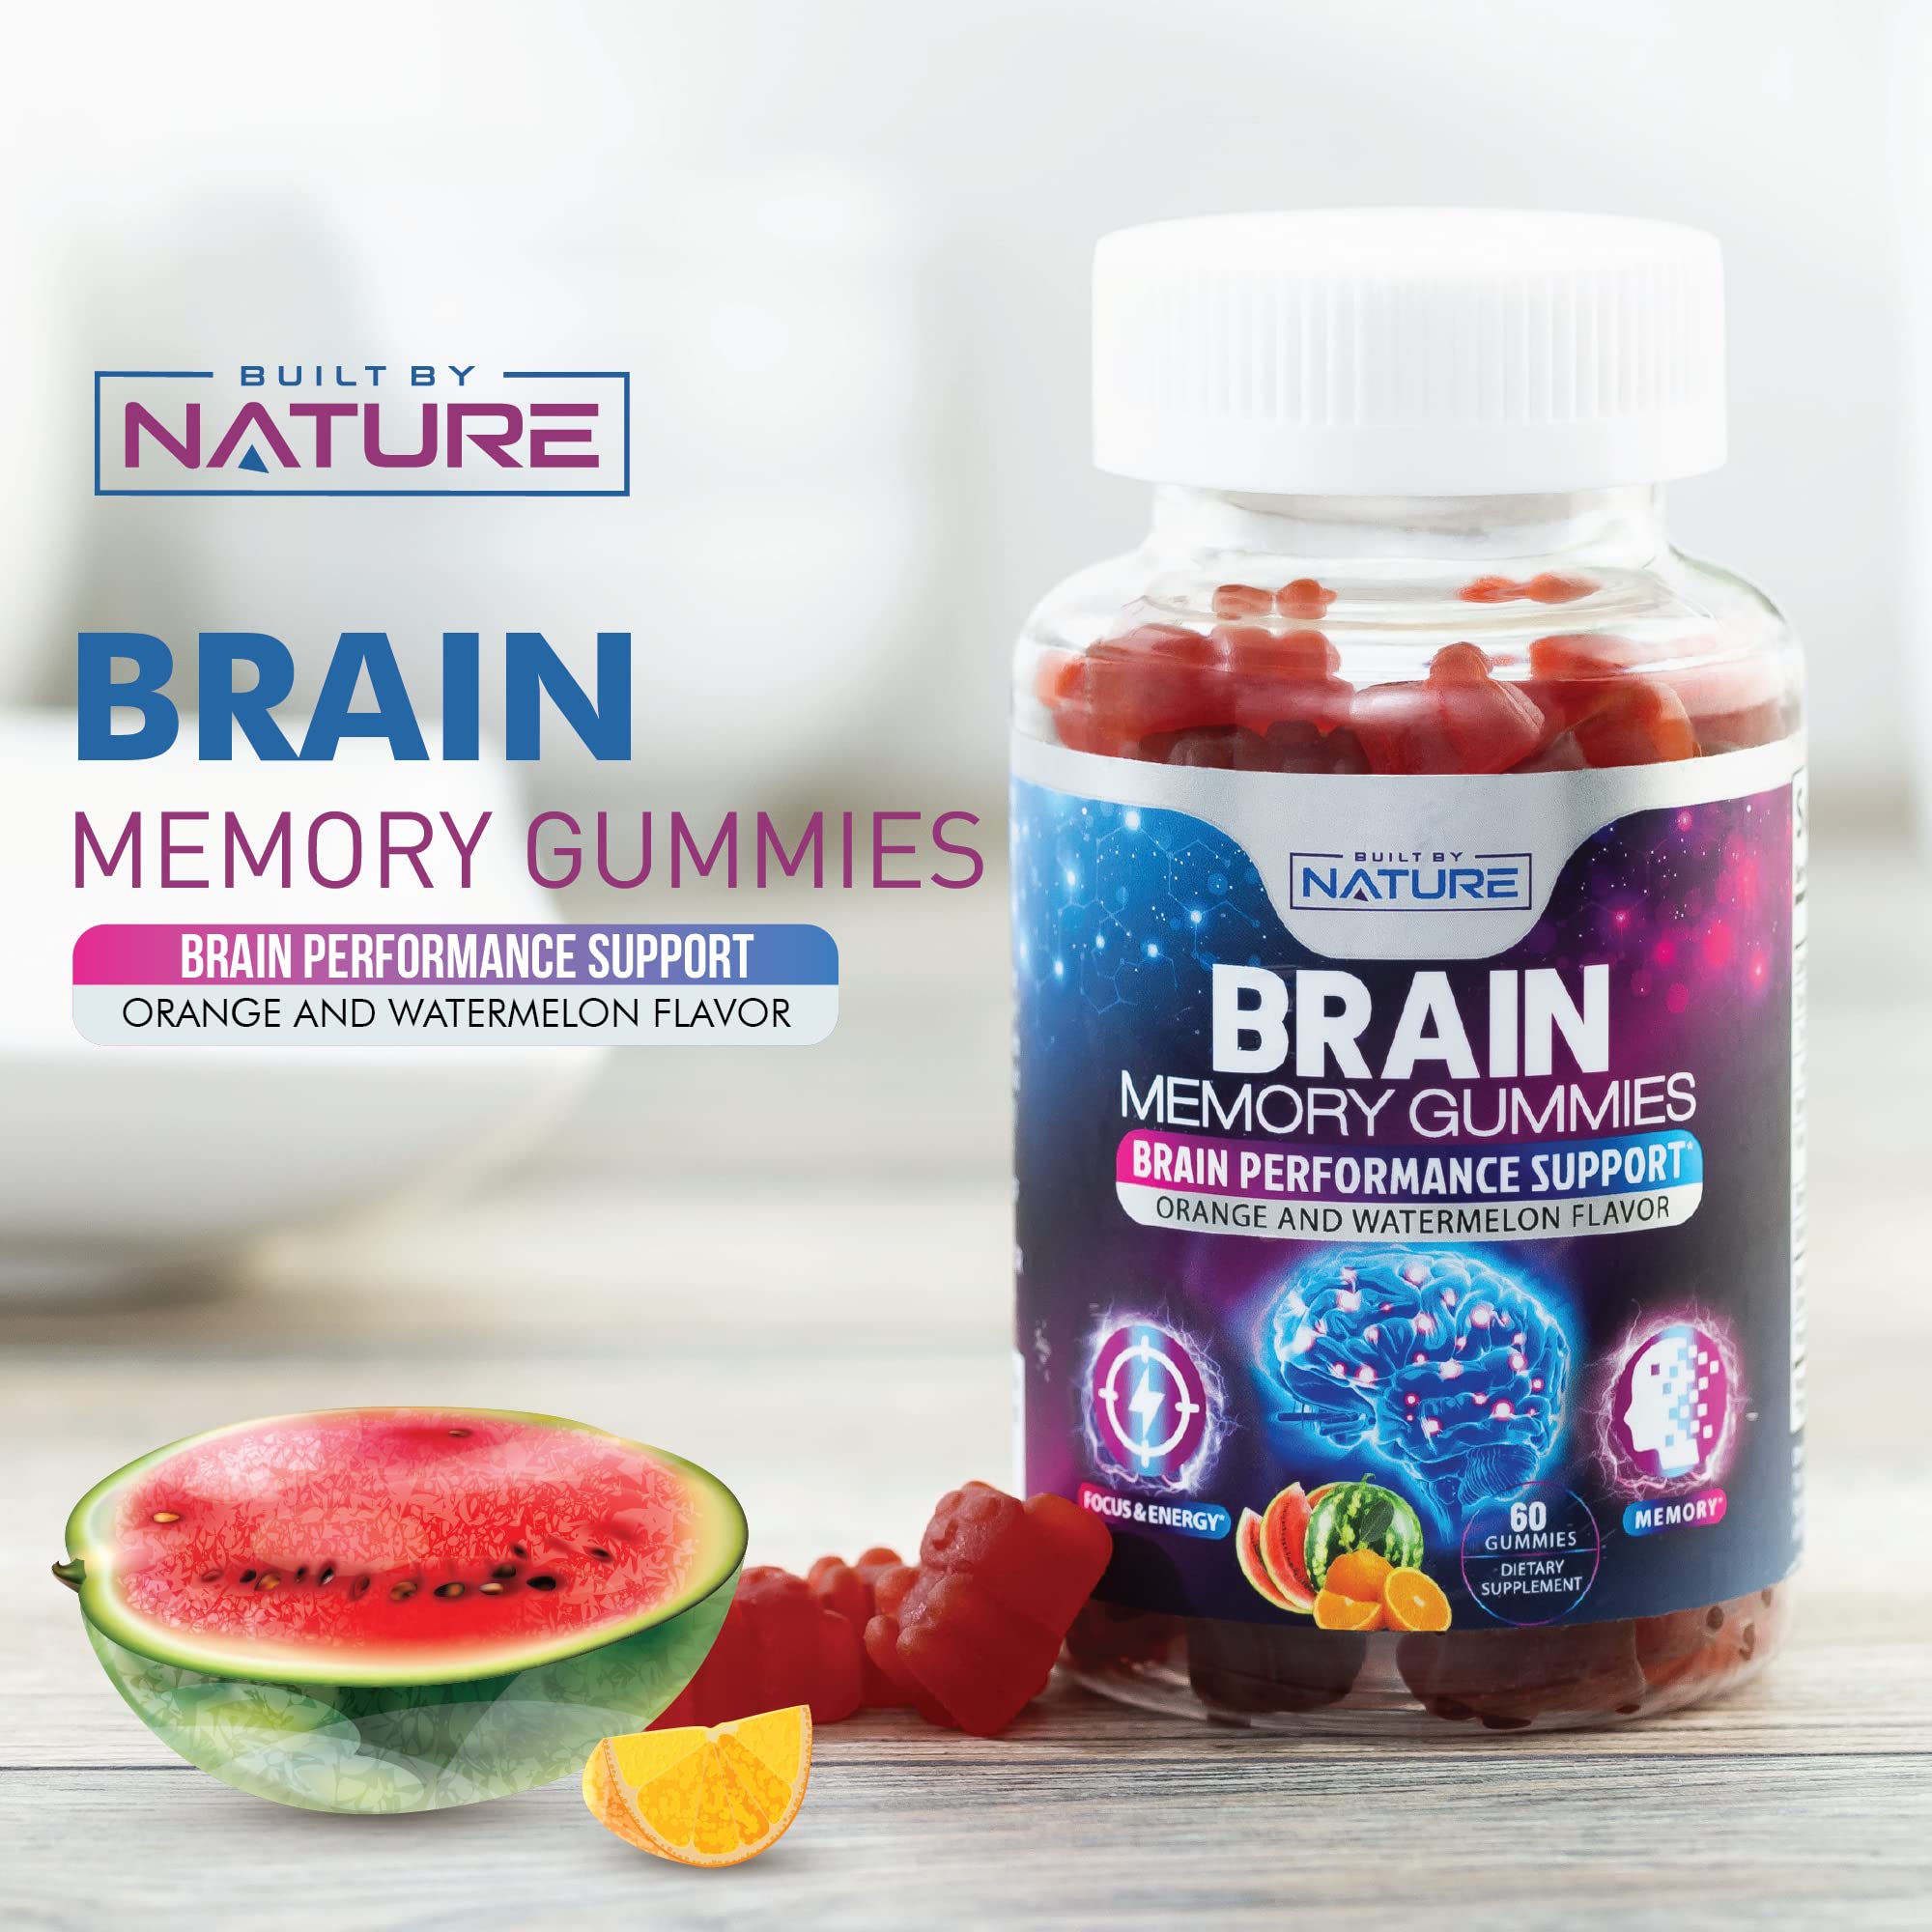 Nootropic Brain Booster Gummies Supplement - Memory, Focus & Concentration Gummy with Vitamins B6 & B12, Proven and Tested Phosphatidylserine - Natural Cognitive Function & Energy Boost, 60 Gummies